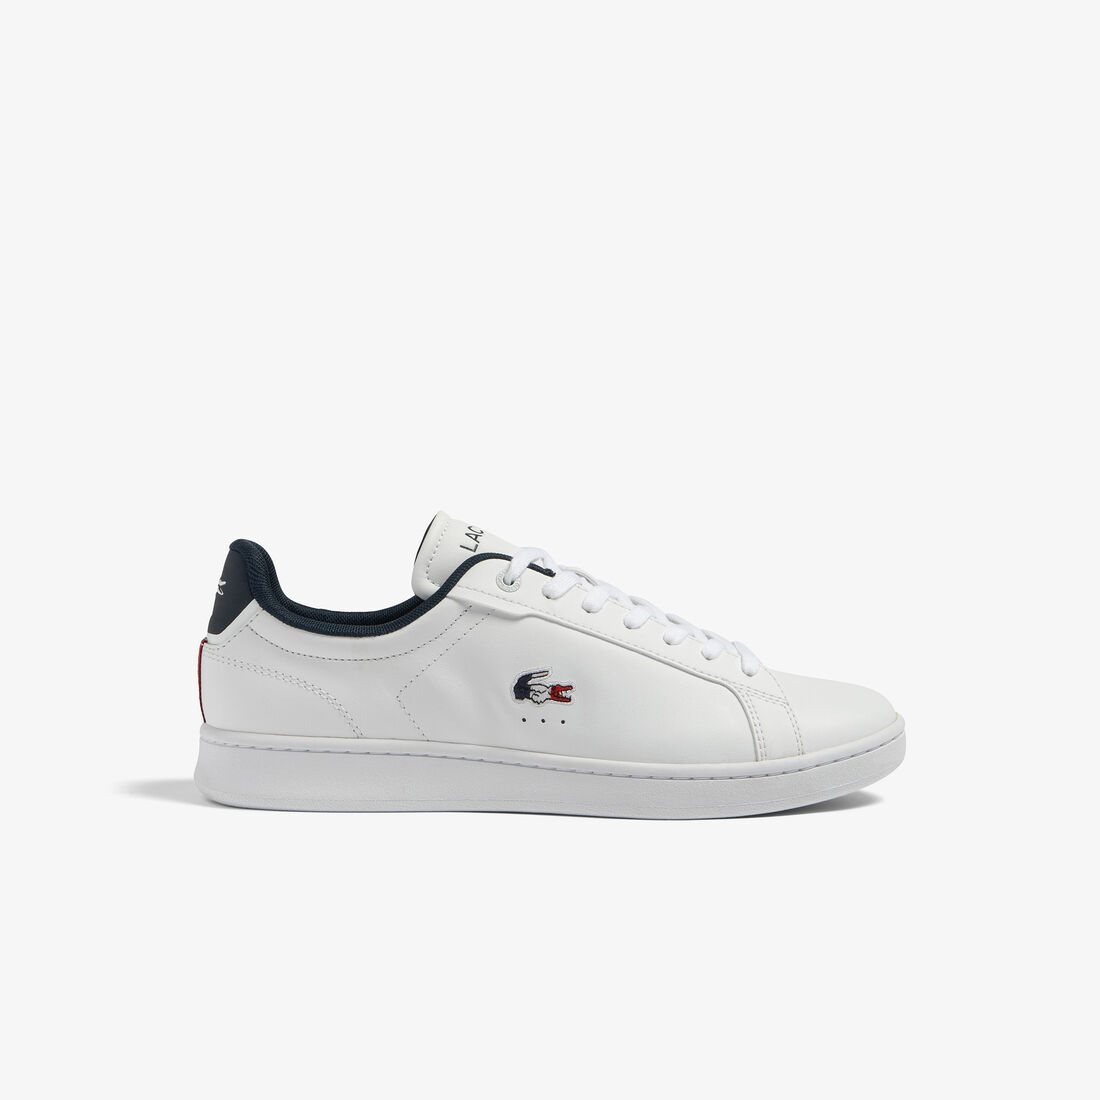 Men's Lacoste Carnaby Pro Leather Tricolour Trainers